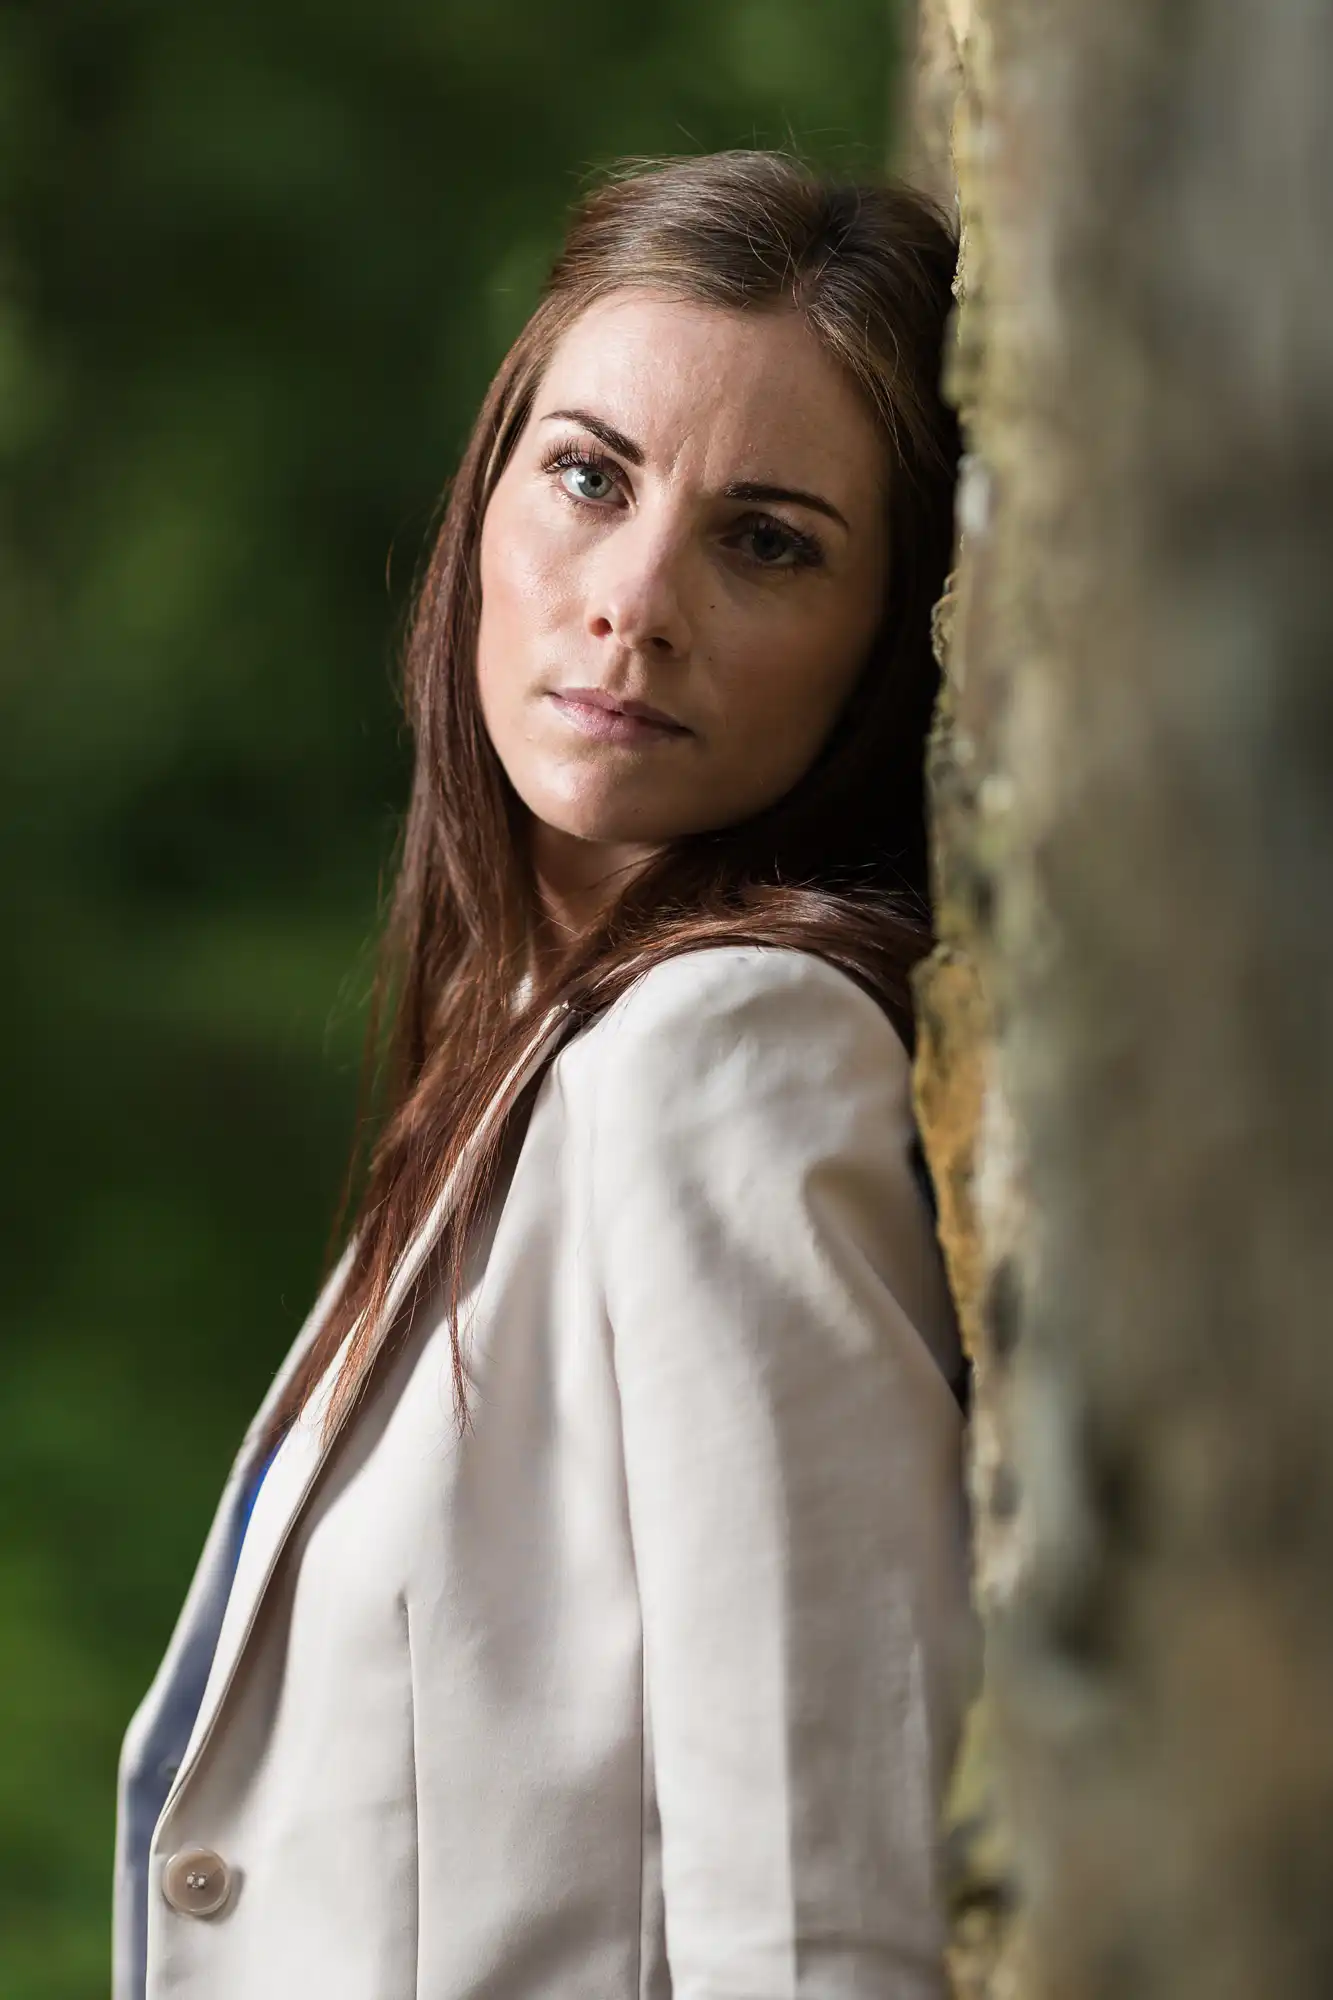 A woman with long brown hair, wearing a white blazer, looking thoughtfully past the camera while leaning against a tree in a wooded area.